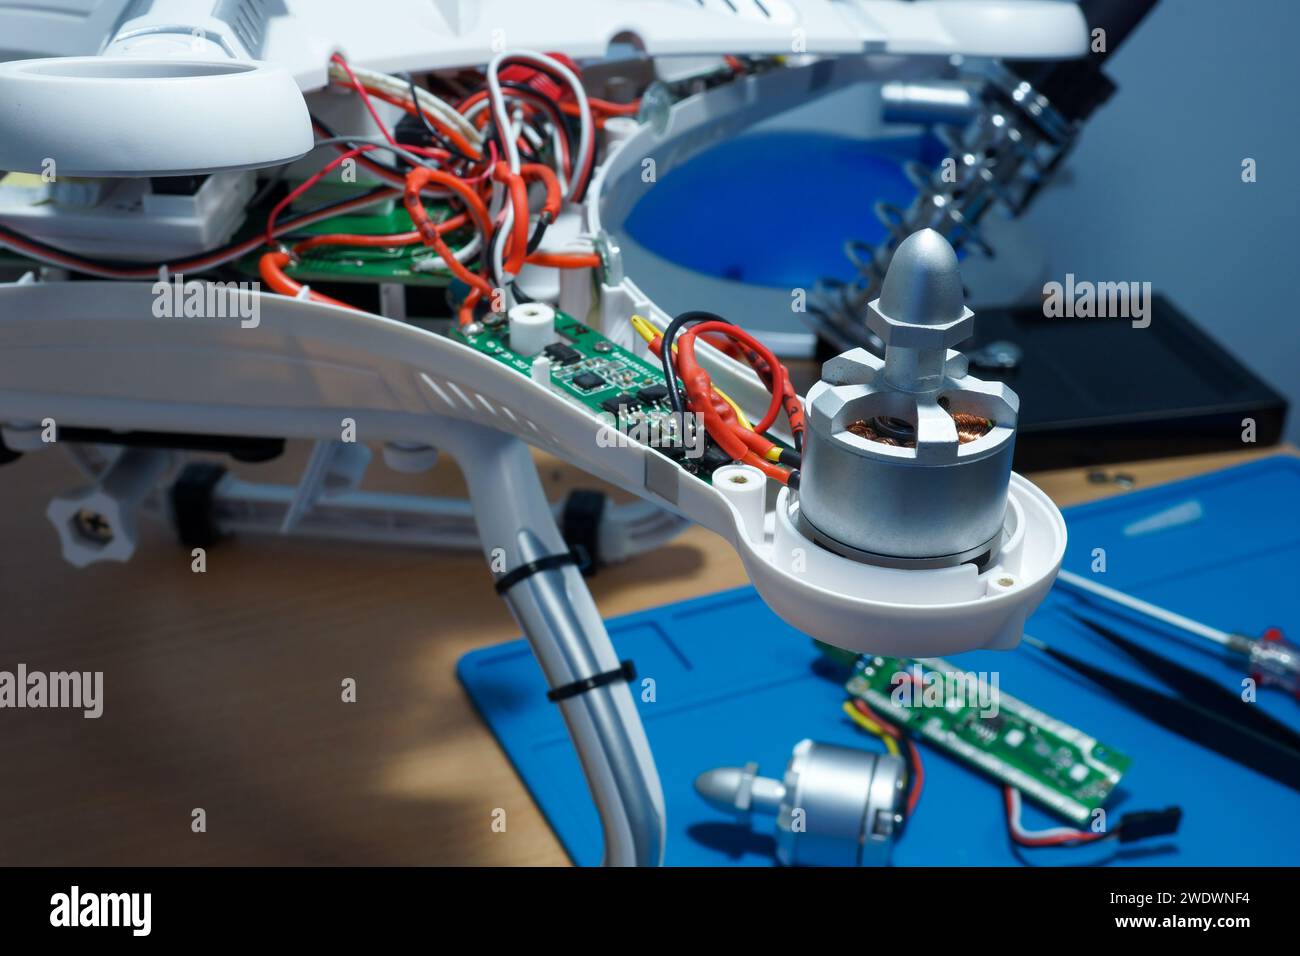 UAV repair. Disassembled drone and spare parts. Stock Photo